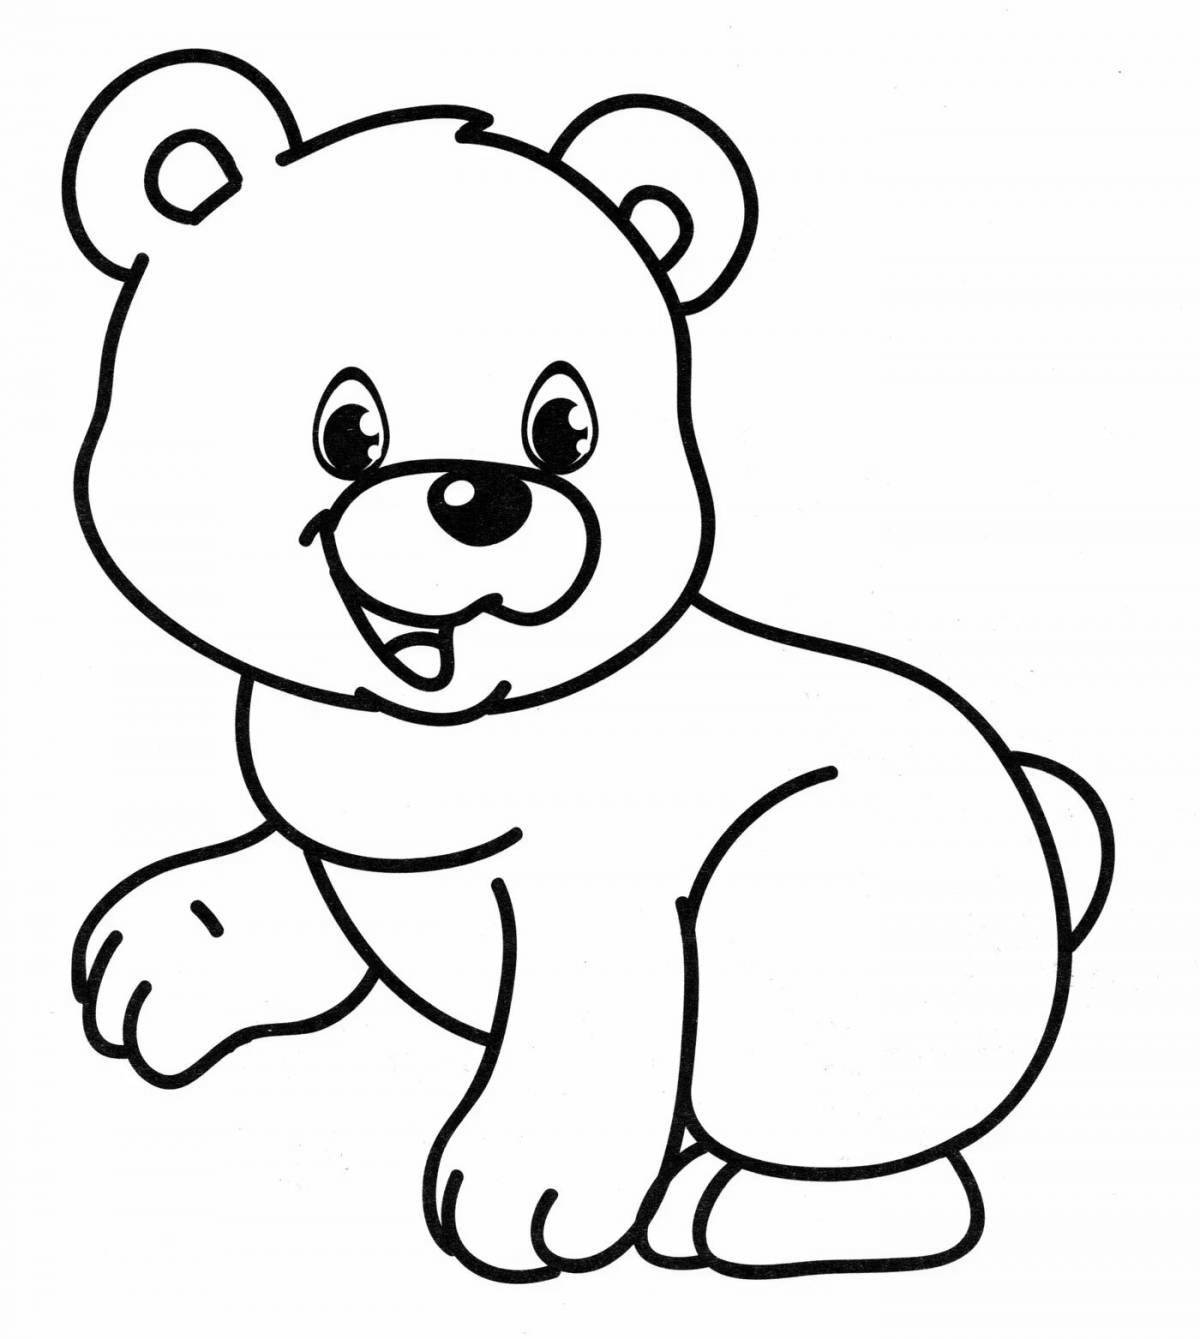 Fun coloring bear for children 5-6 years old